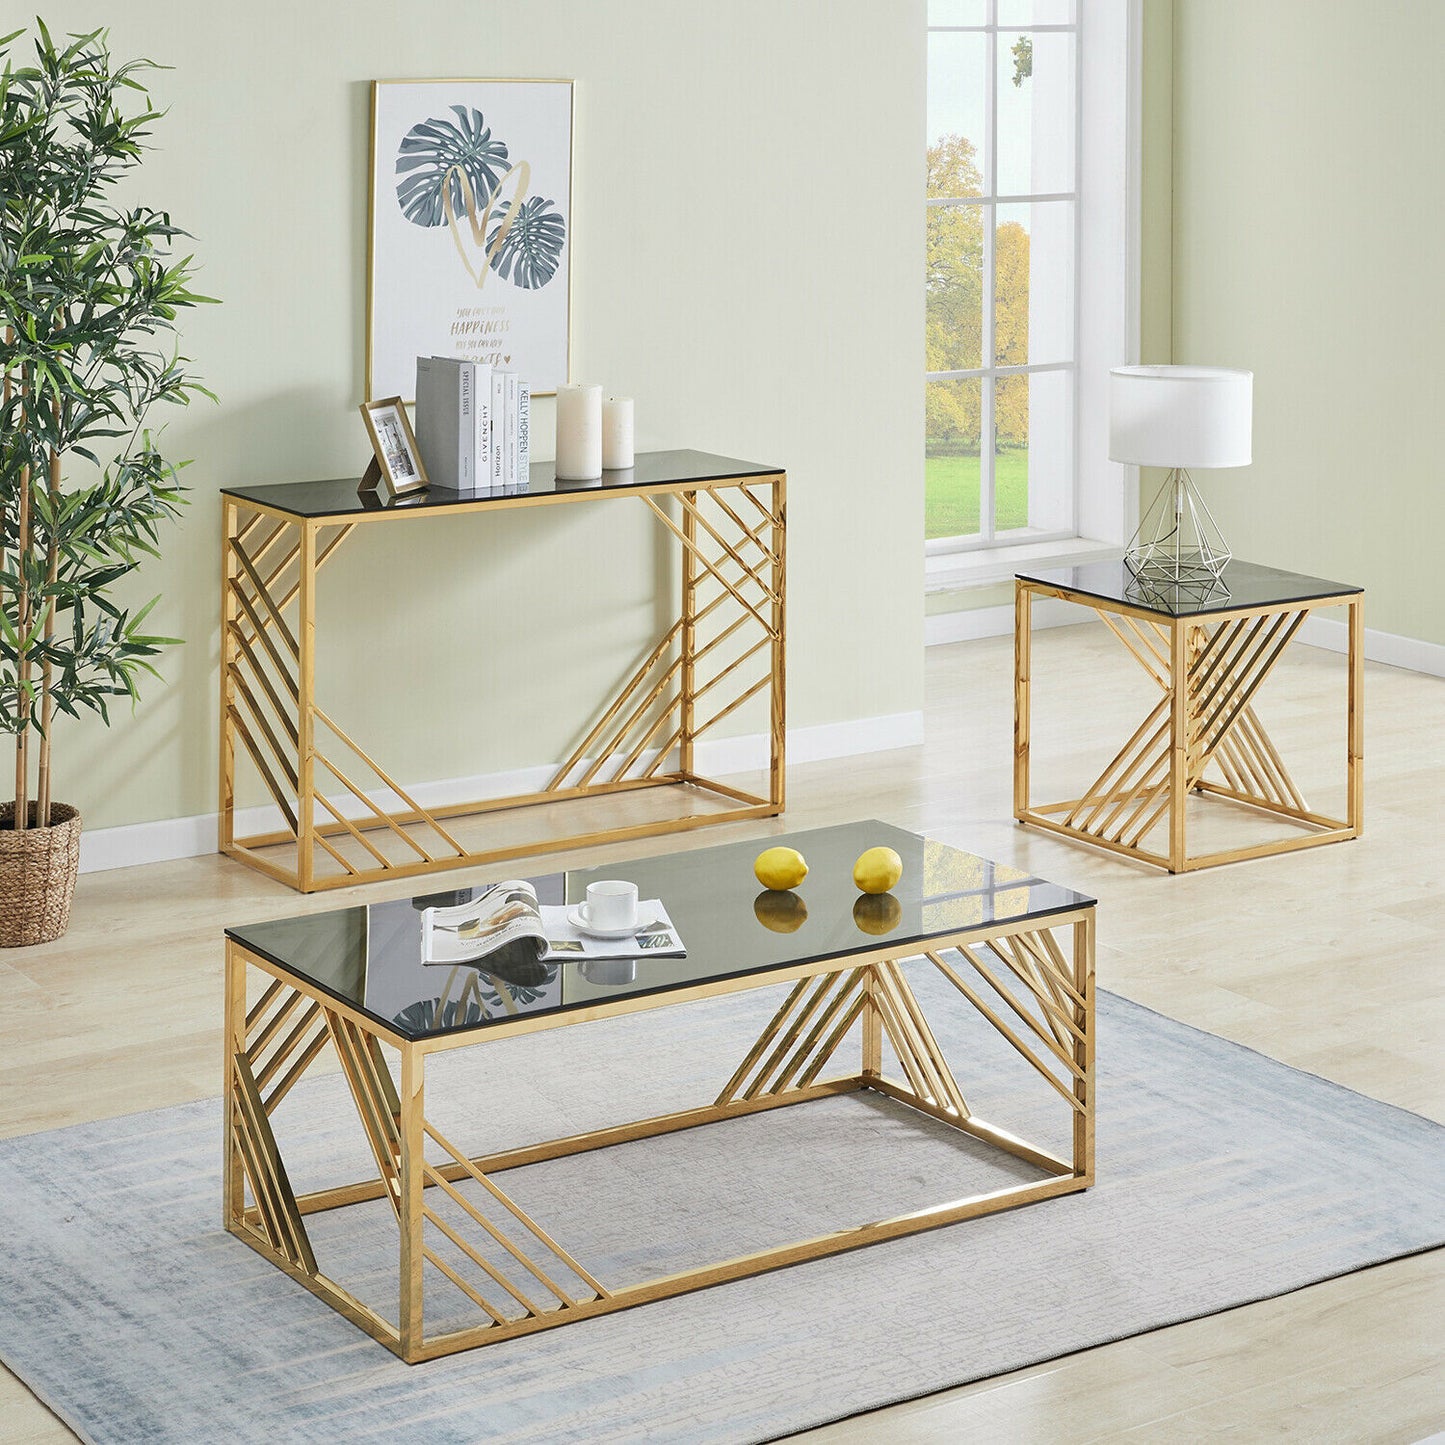 Console and coffee table with side table - JO14